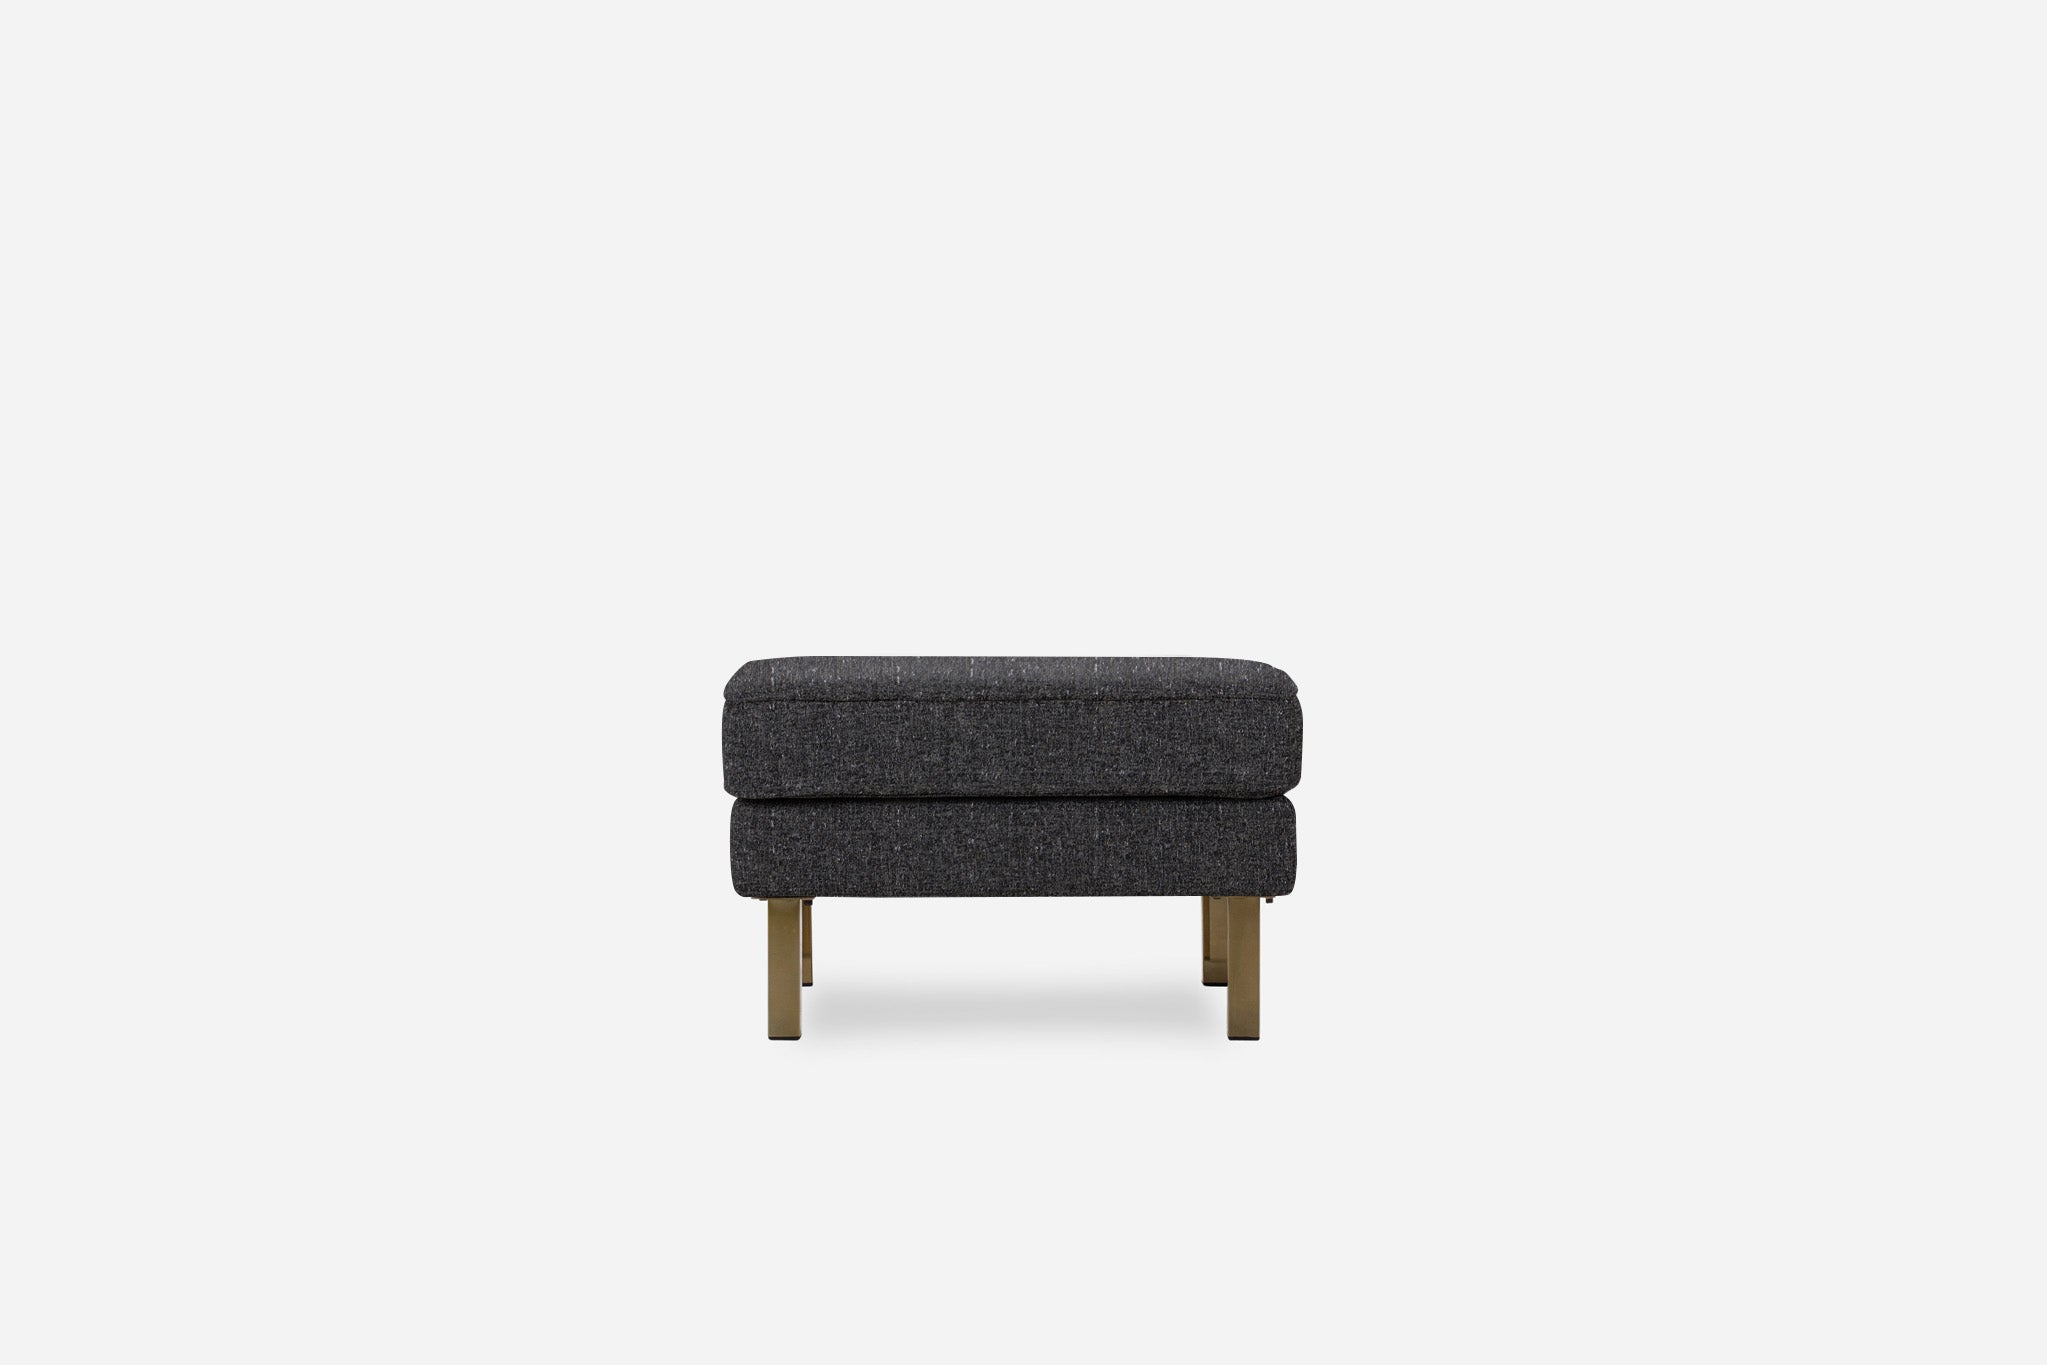 albany ottoman shown in charcoal with gold legs